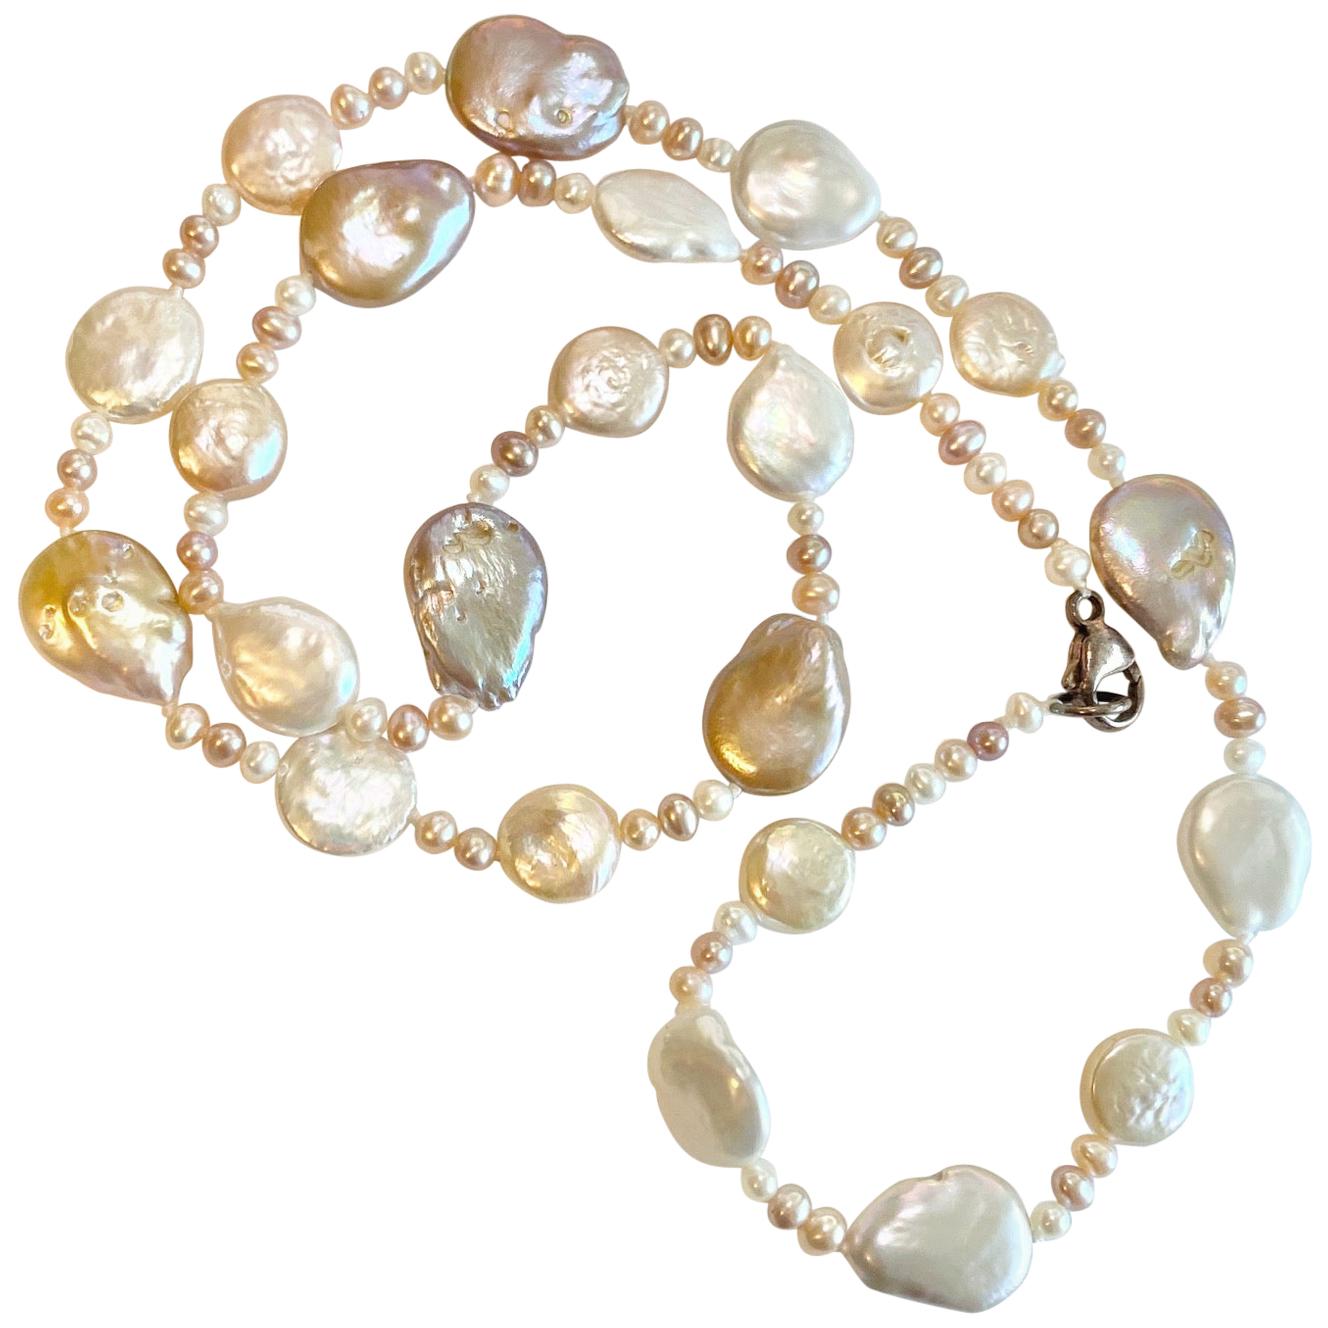 Genuine Rose Pearl Strand Necklace with Baroque and Rd Pearls, Cultured Pearls